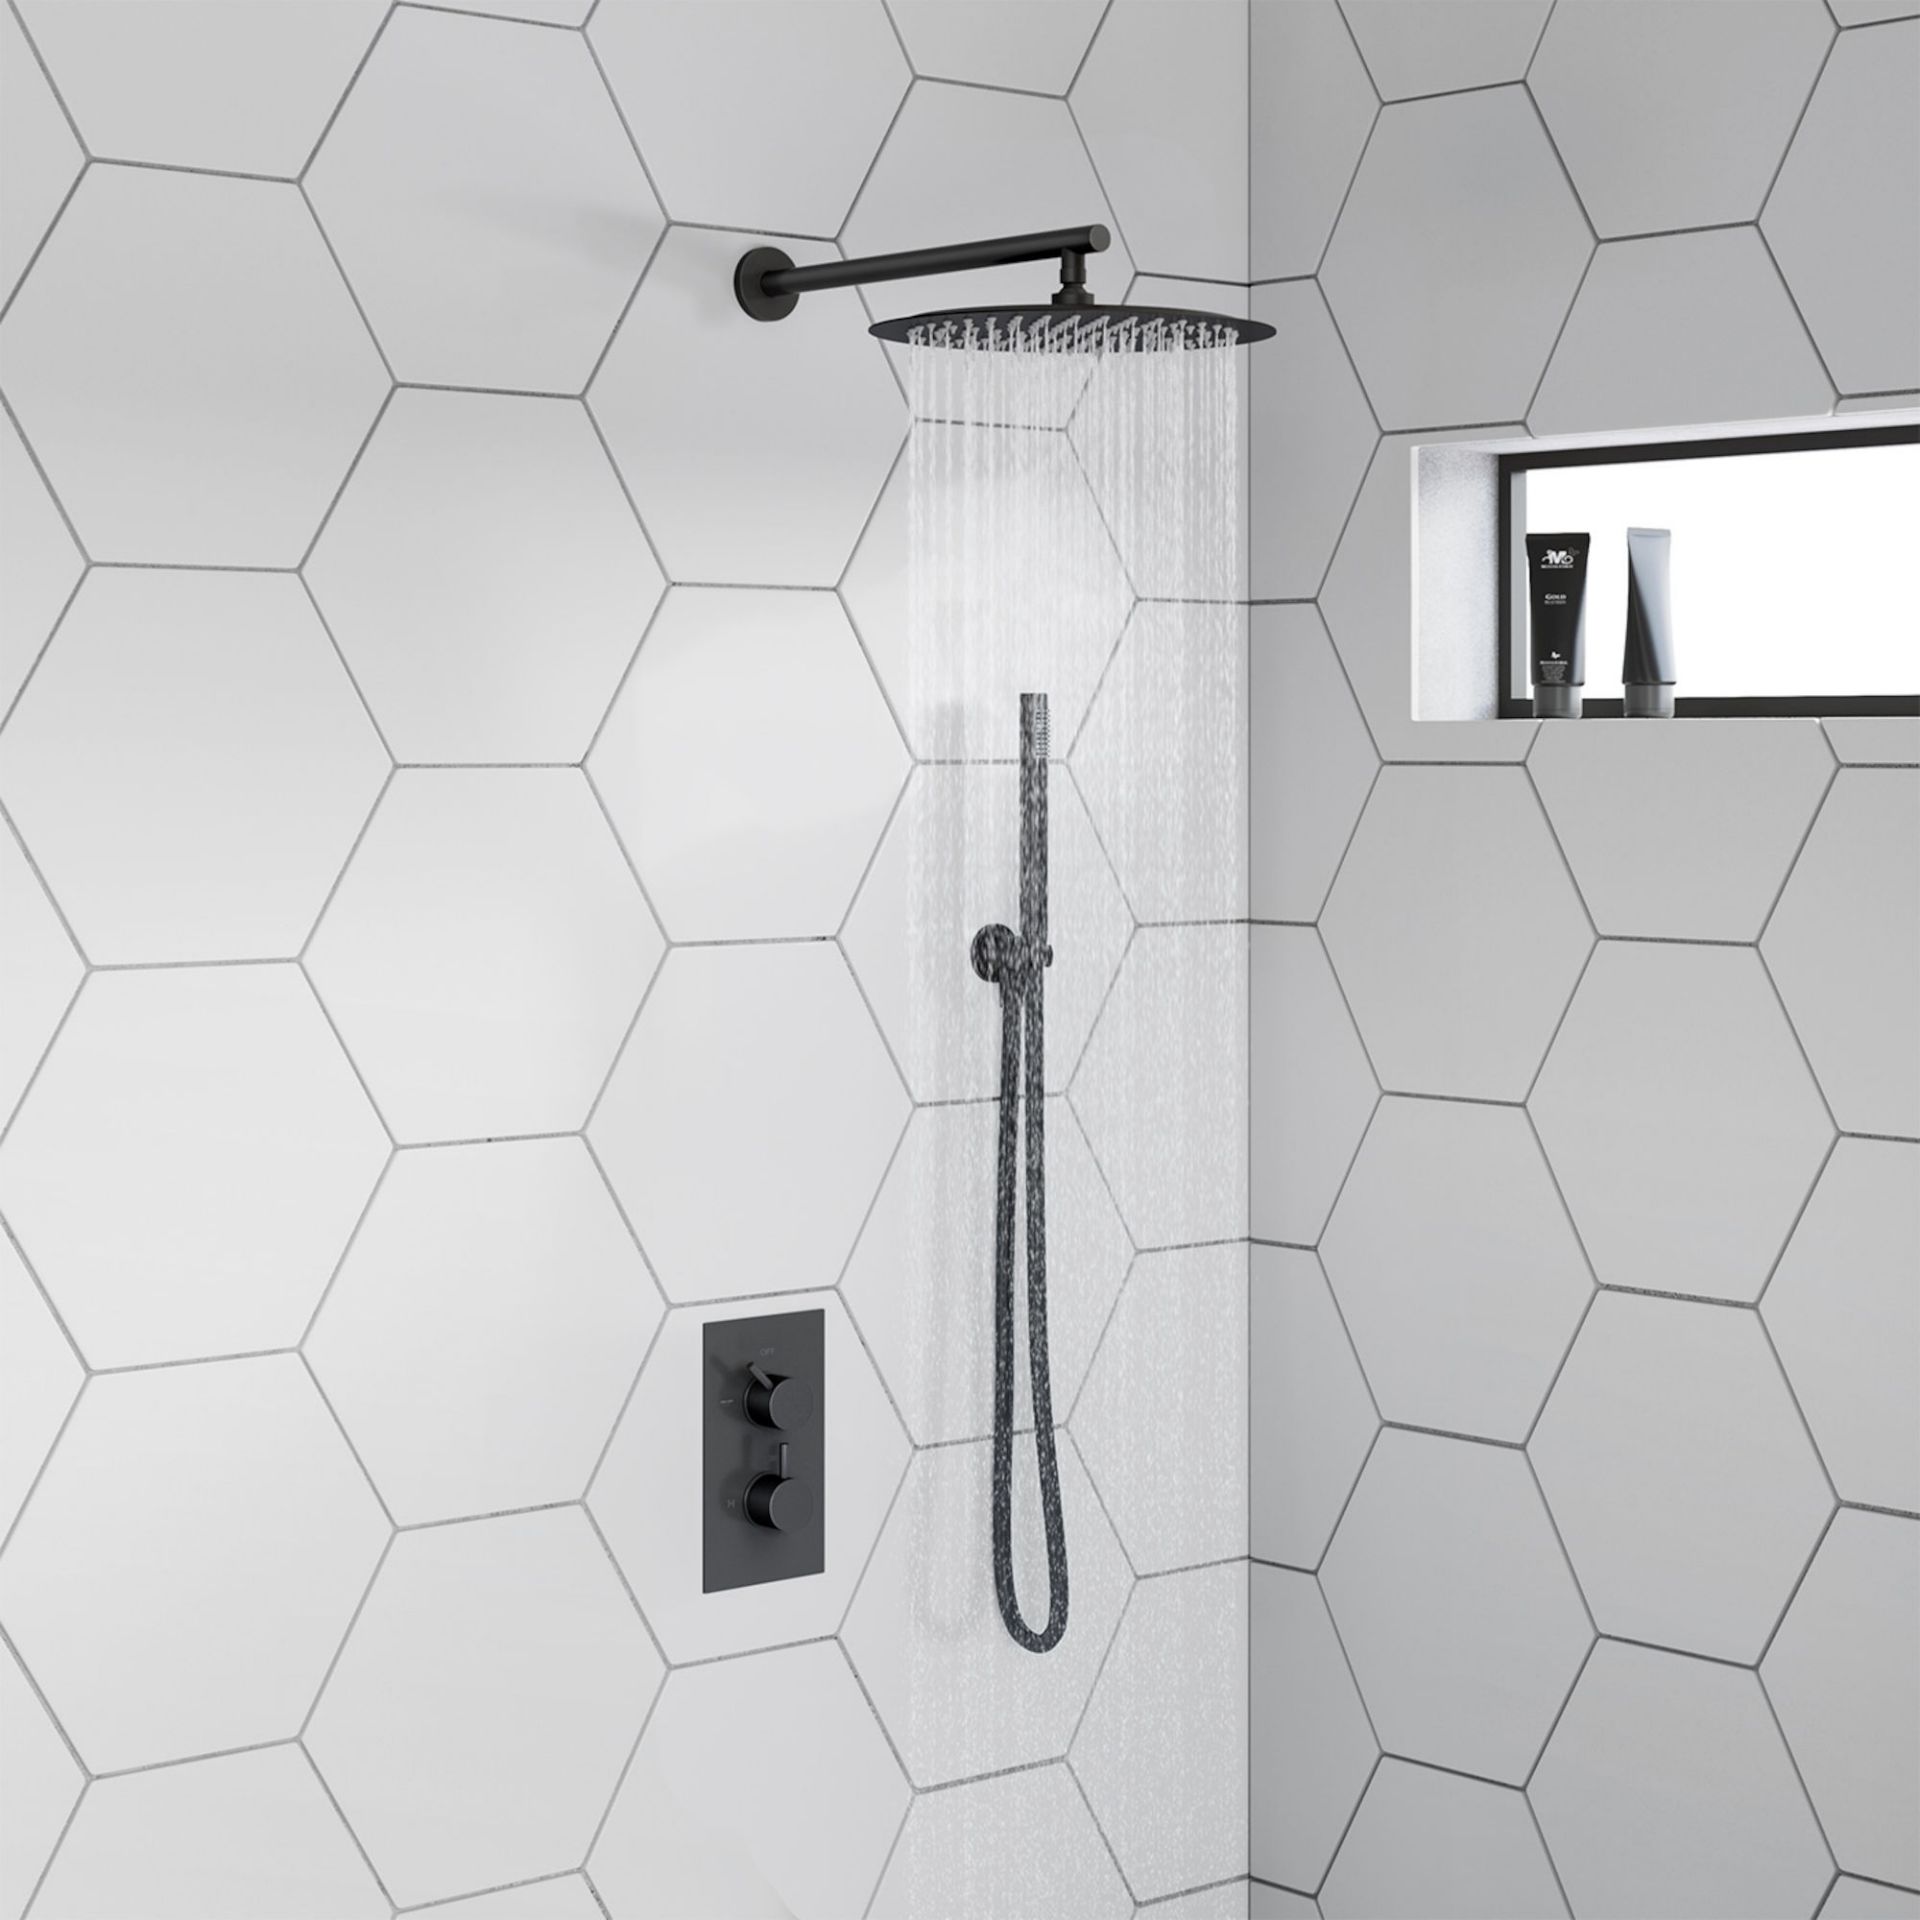 (DW29) Matte Black Round Concealed Thermostatic Mixer Shower Kit & Large Head. RRP £399.99. Co...